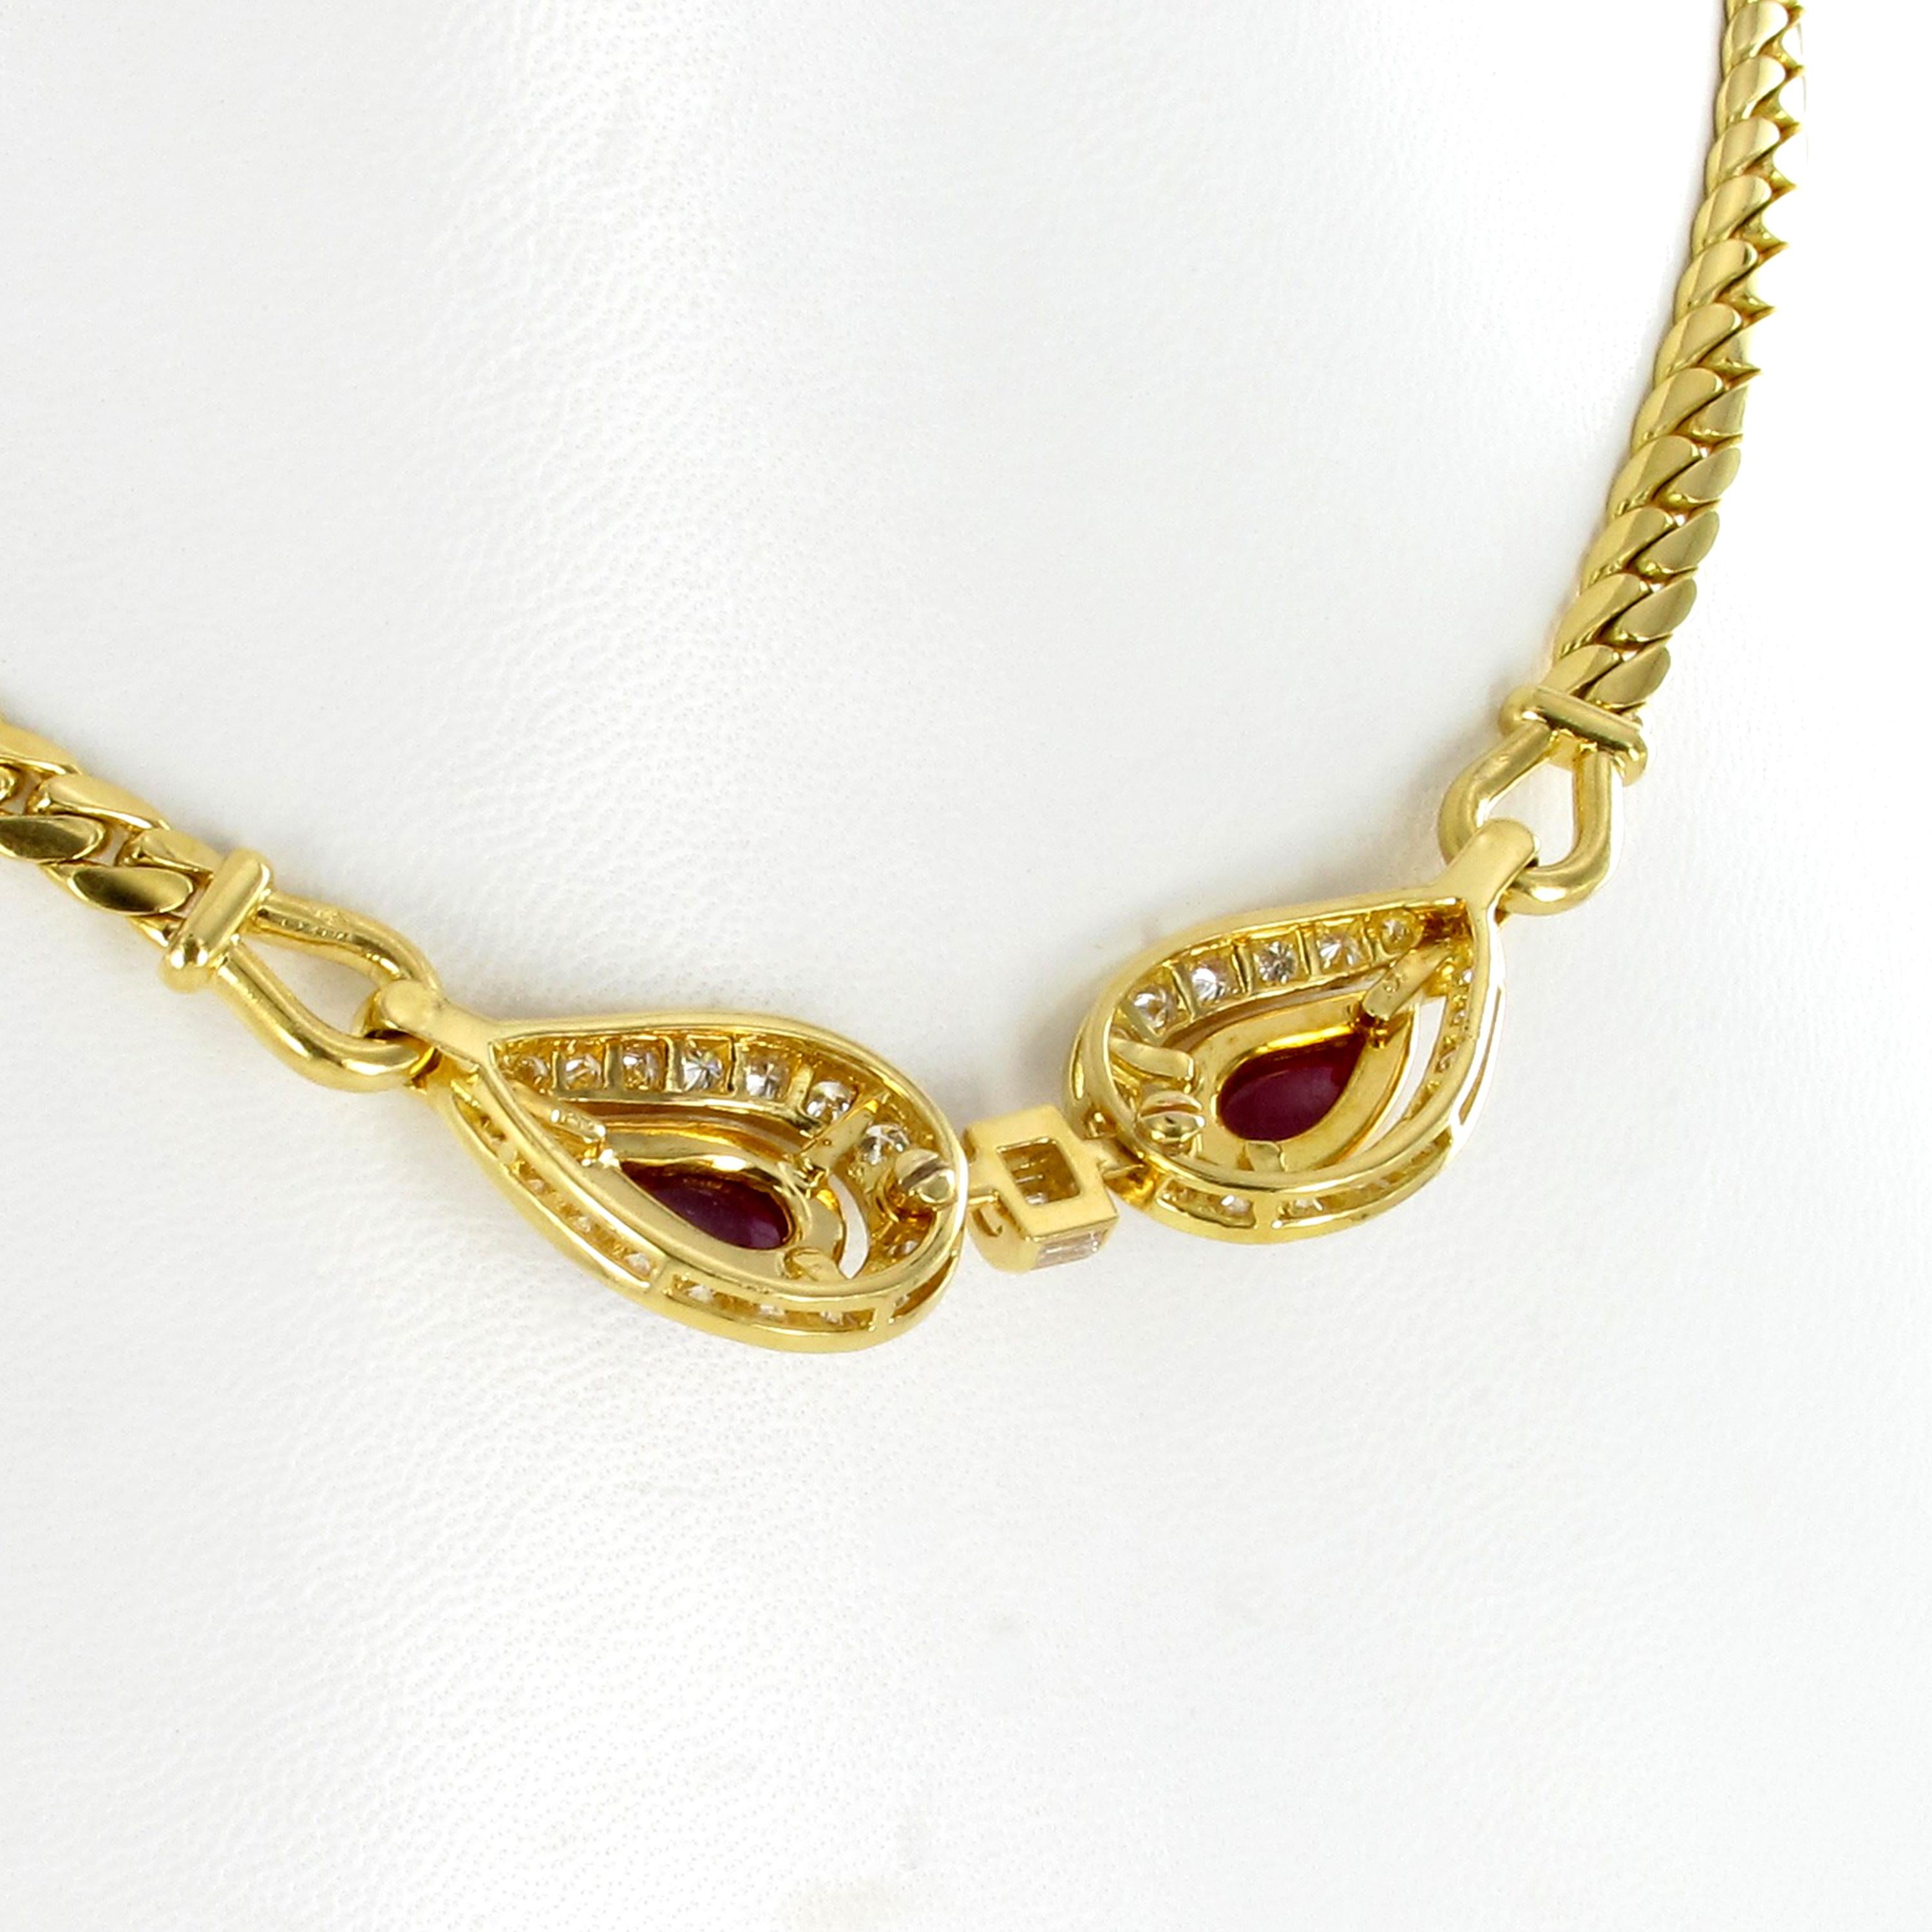 Cartier Paris Ruby and Diamond Necklace in 18 Karat Yellow Gold 2